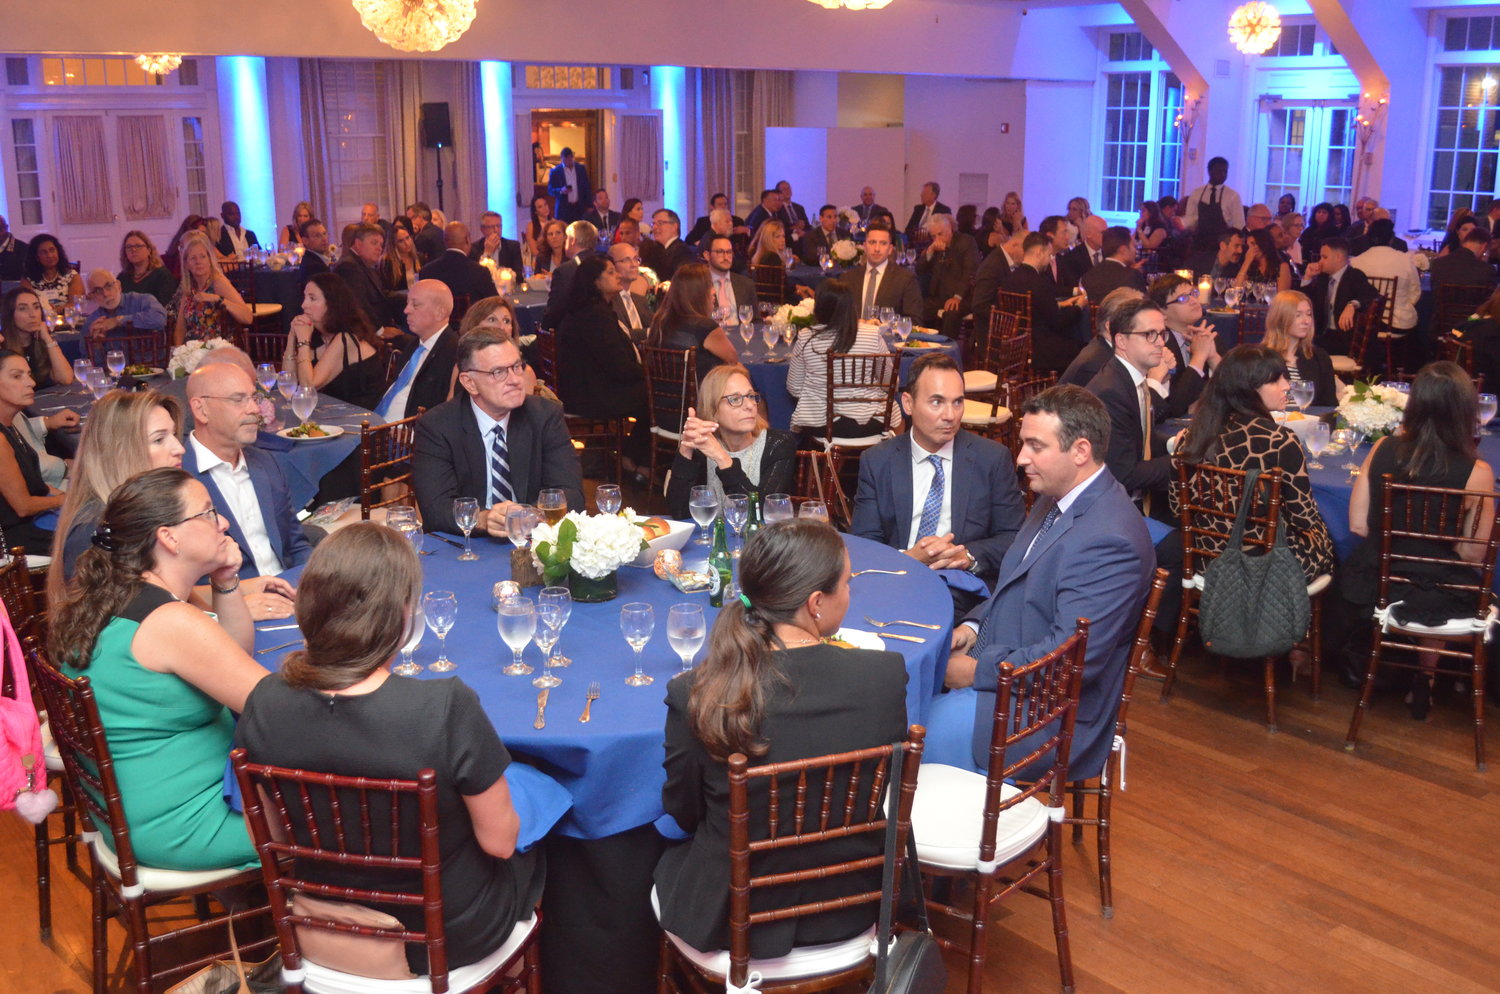 Top Lawyer honorees enjoying dinner during the awards ceremony with friends, family and loved ones.